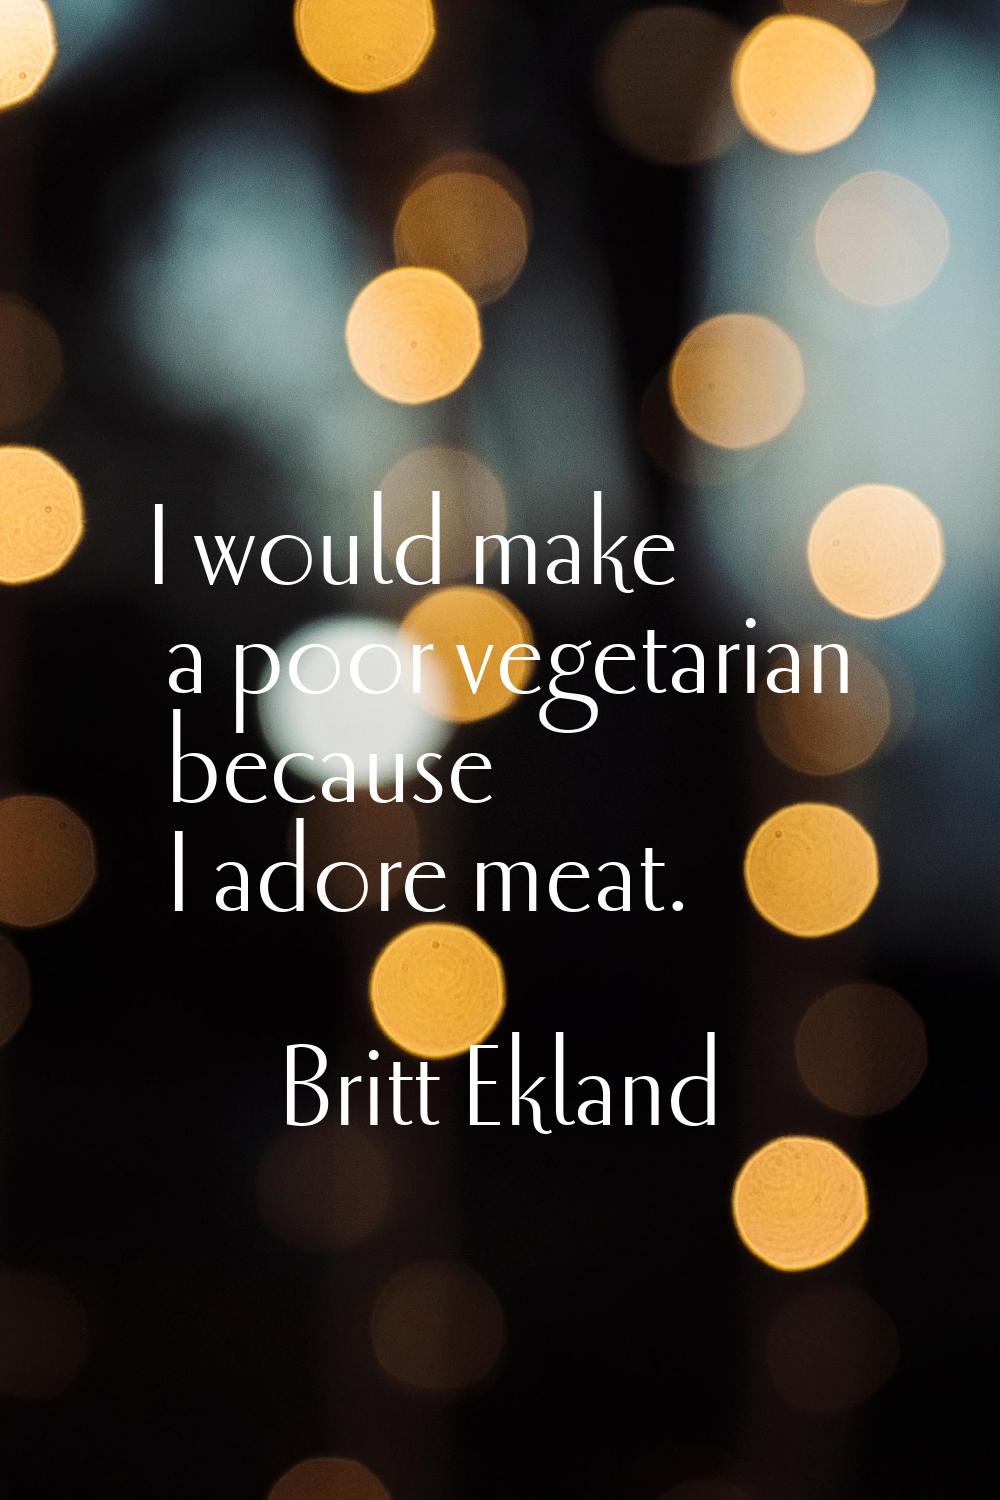 I would make a poor vegetarian because I adore meat.